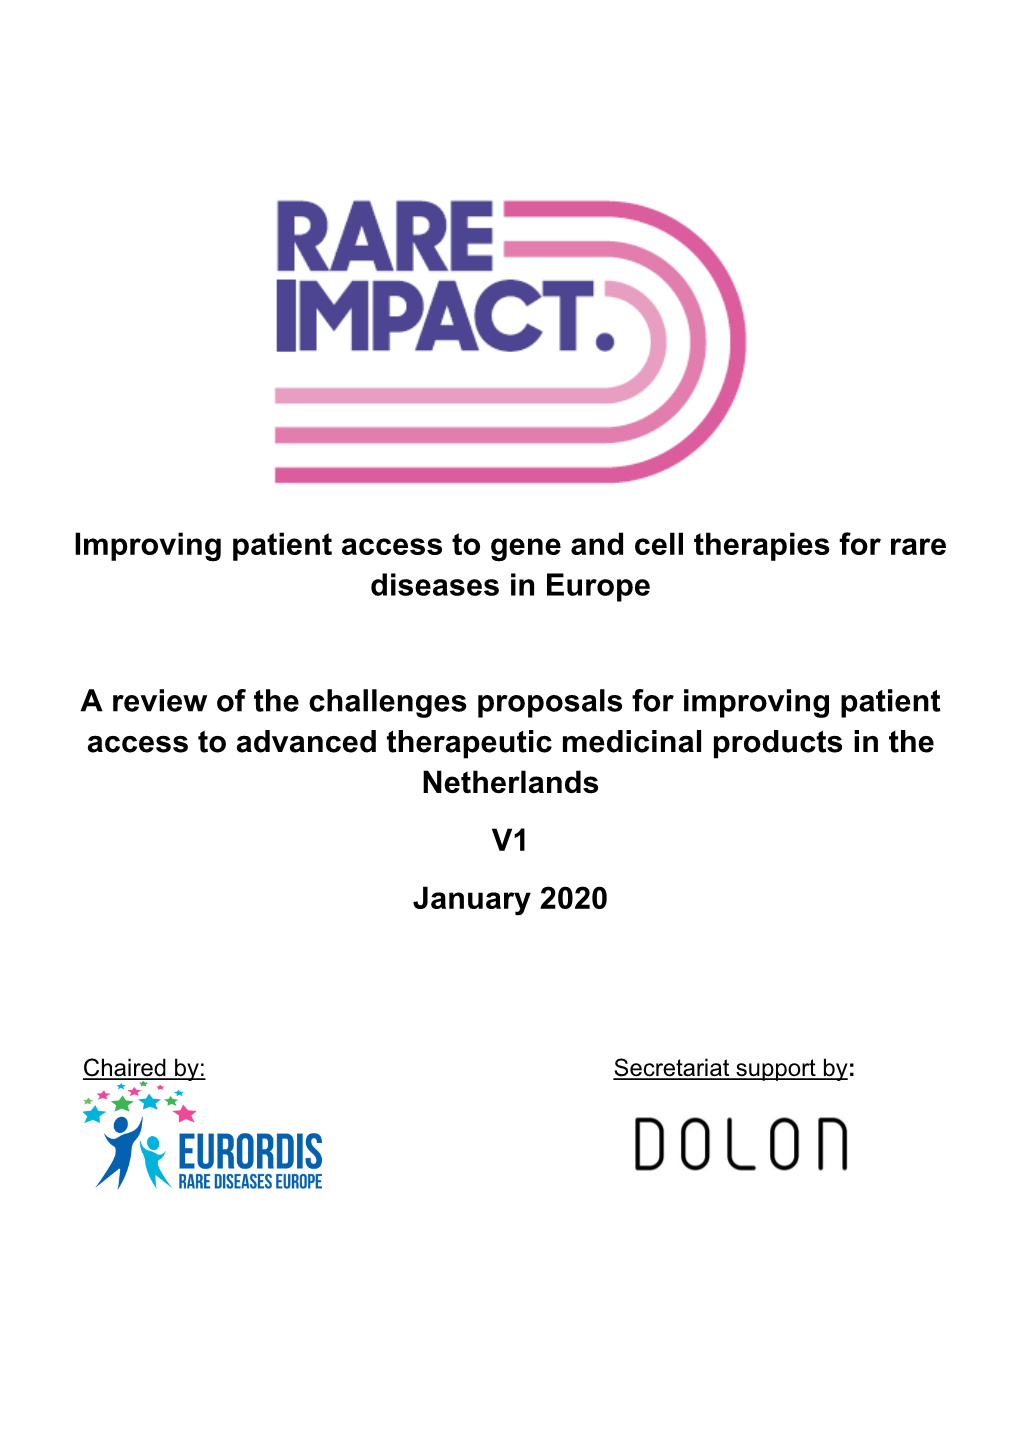 Improving Patient Access to Gene and Cell Therapies for Rare Diseases in Europe